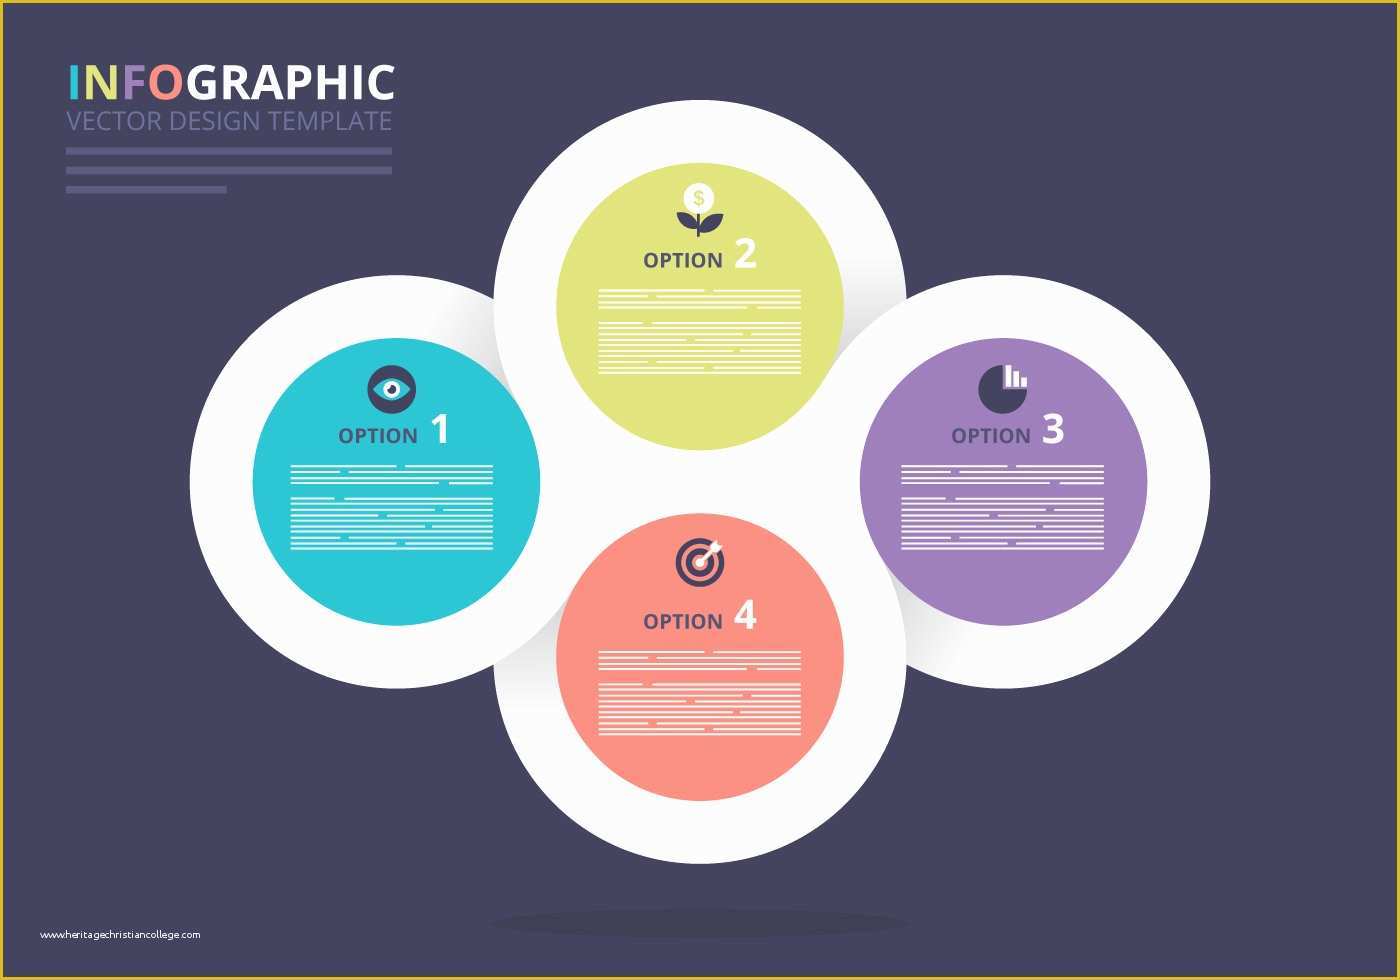 Free Editable Infographic Templates Of 30 Free Infographic Templates to